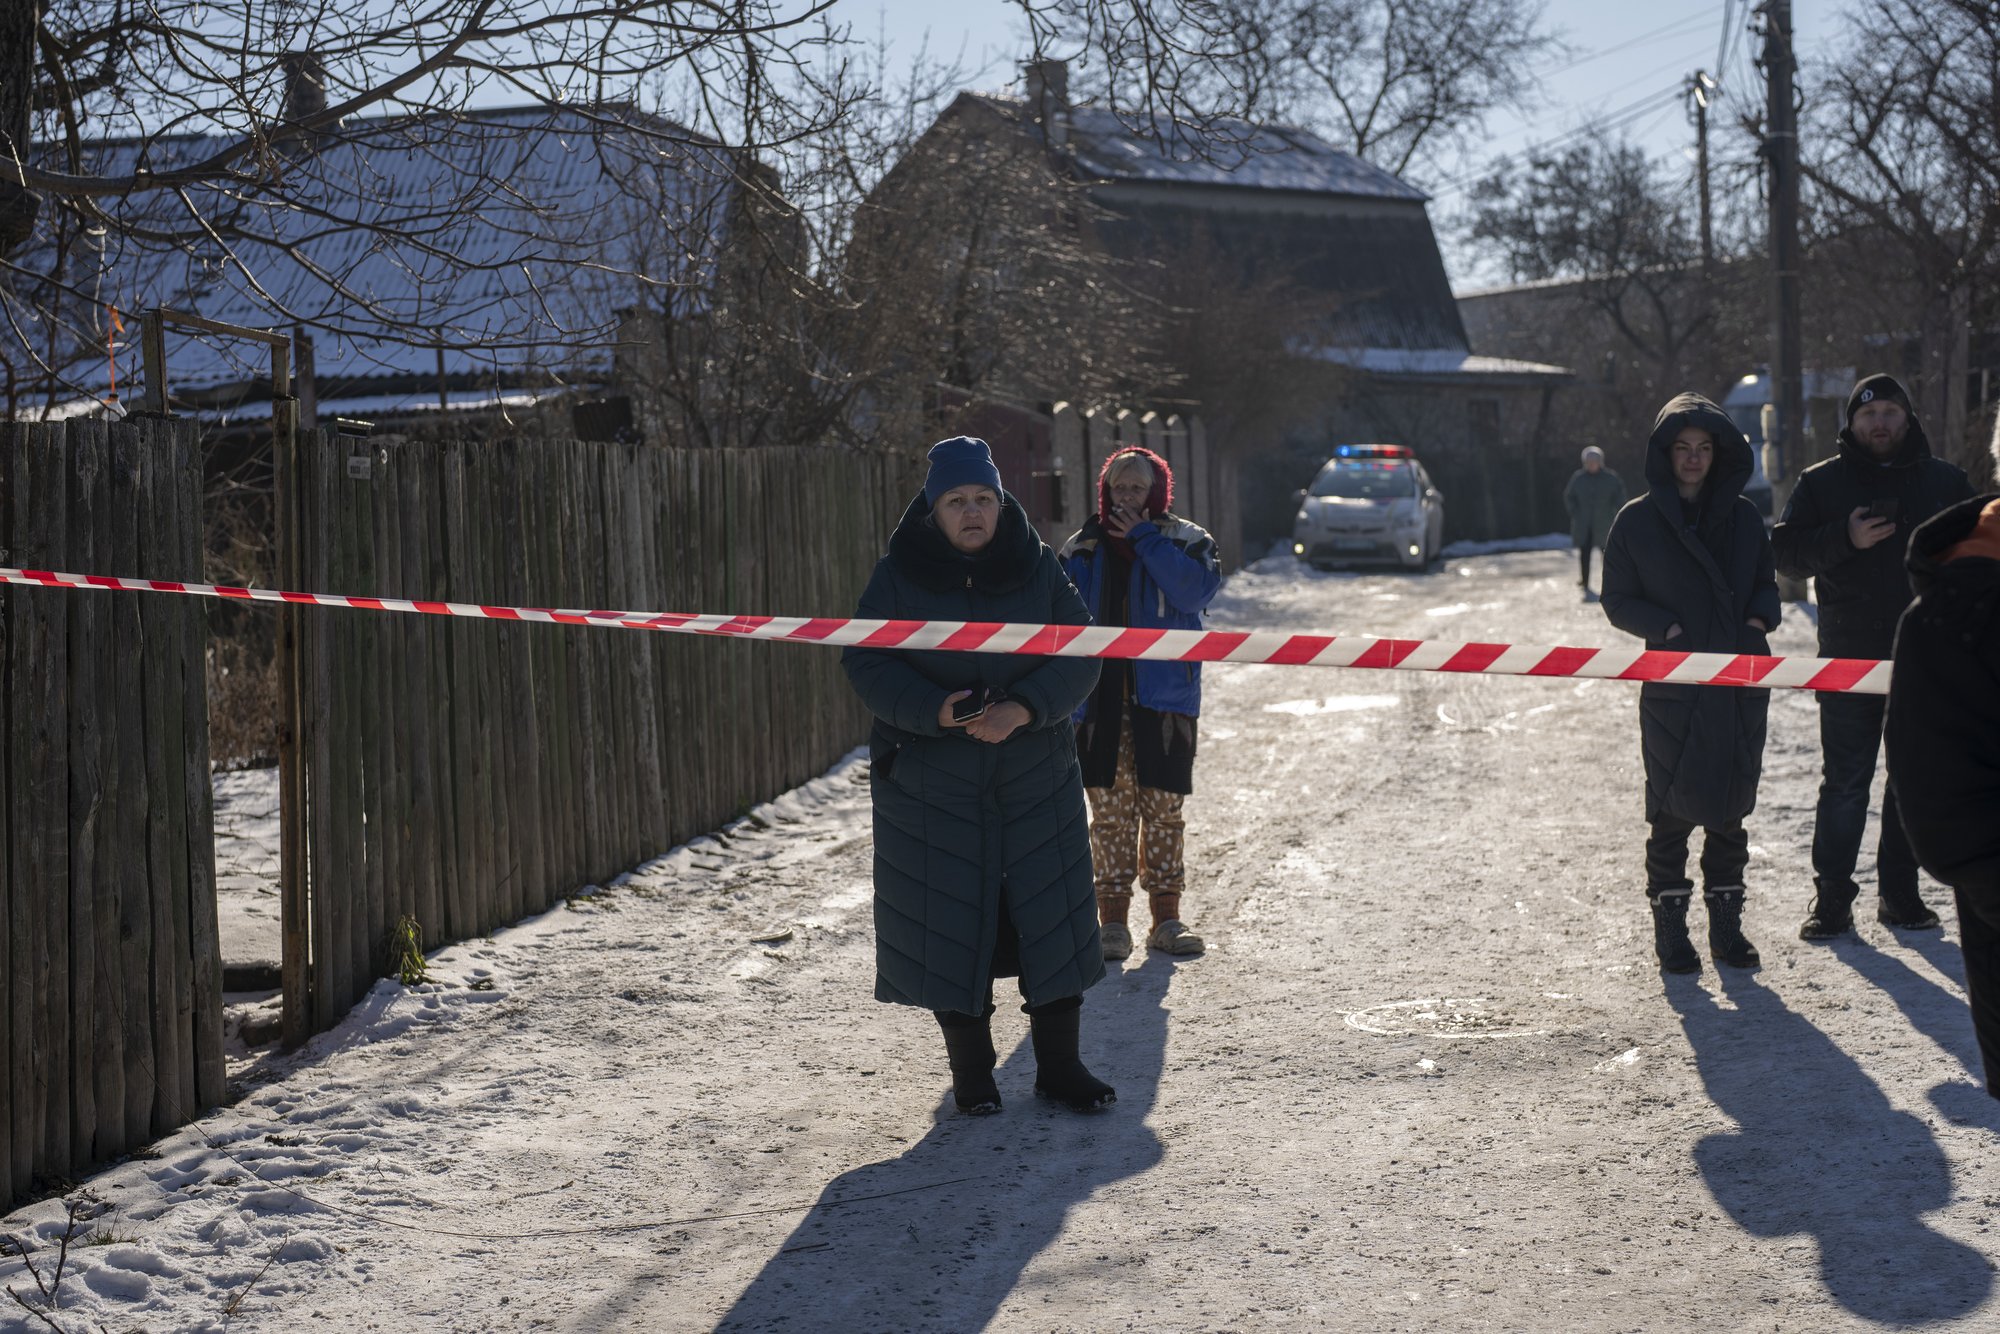 Residents wait behind police cordon to return to their homes after a rocket attack in Kyiv suburbs, Ukraine, Friday, Feb. 10, 2023. Russian forces have unleashed a barrage of missile and drone strikes against targets in eastern and southern Ukraine. The Ukrainian military said the Kremlin's forces focused their bombardments early Friday on Ukraine's industrial east, especially the Luhansk and Donetsk provinces. (AP Photo/Emilio Morenatti)